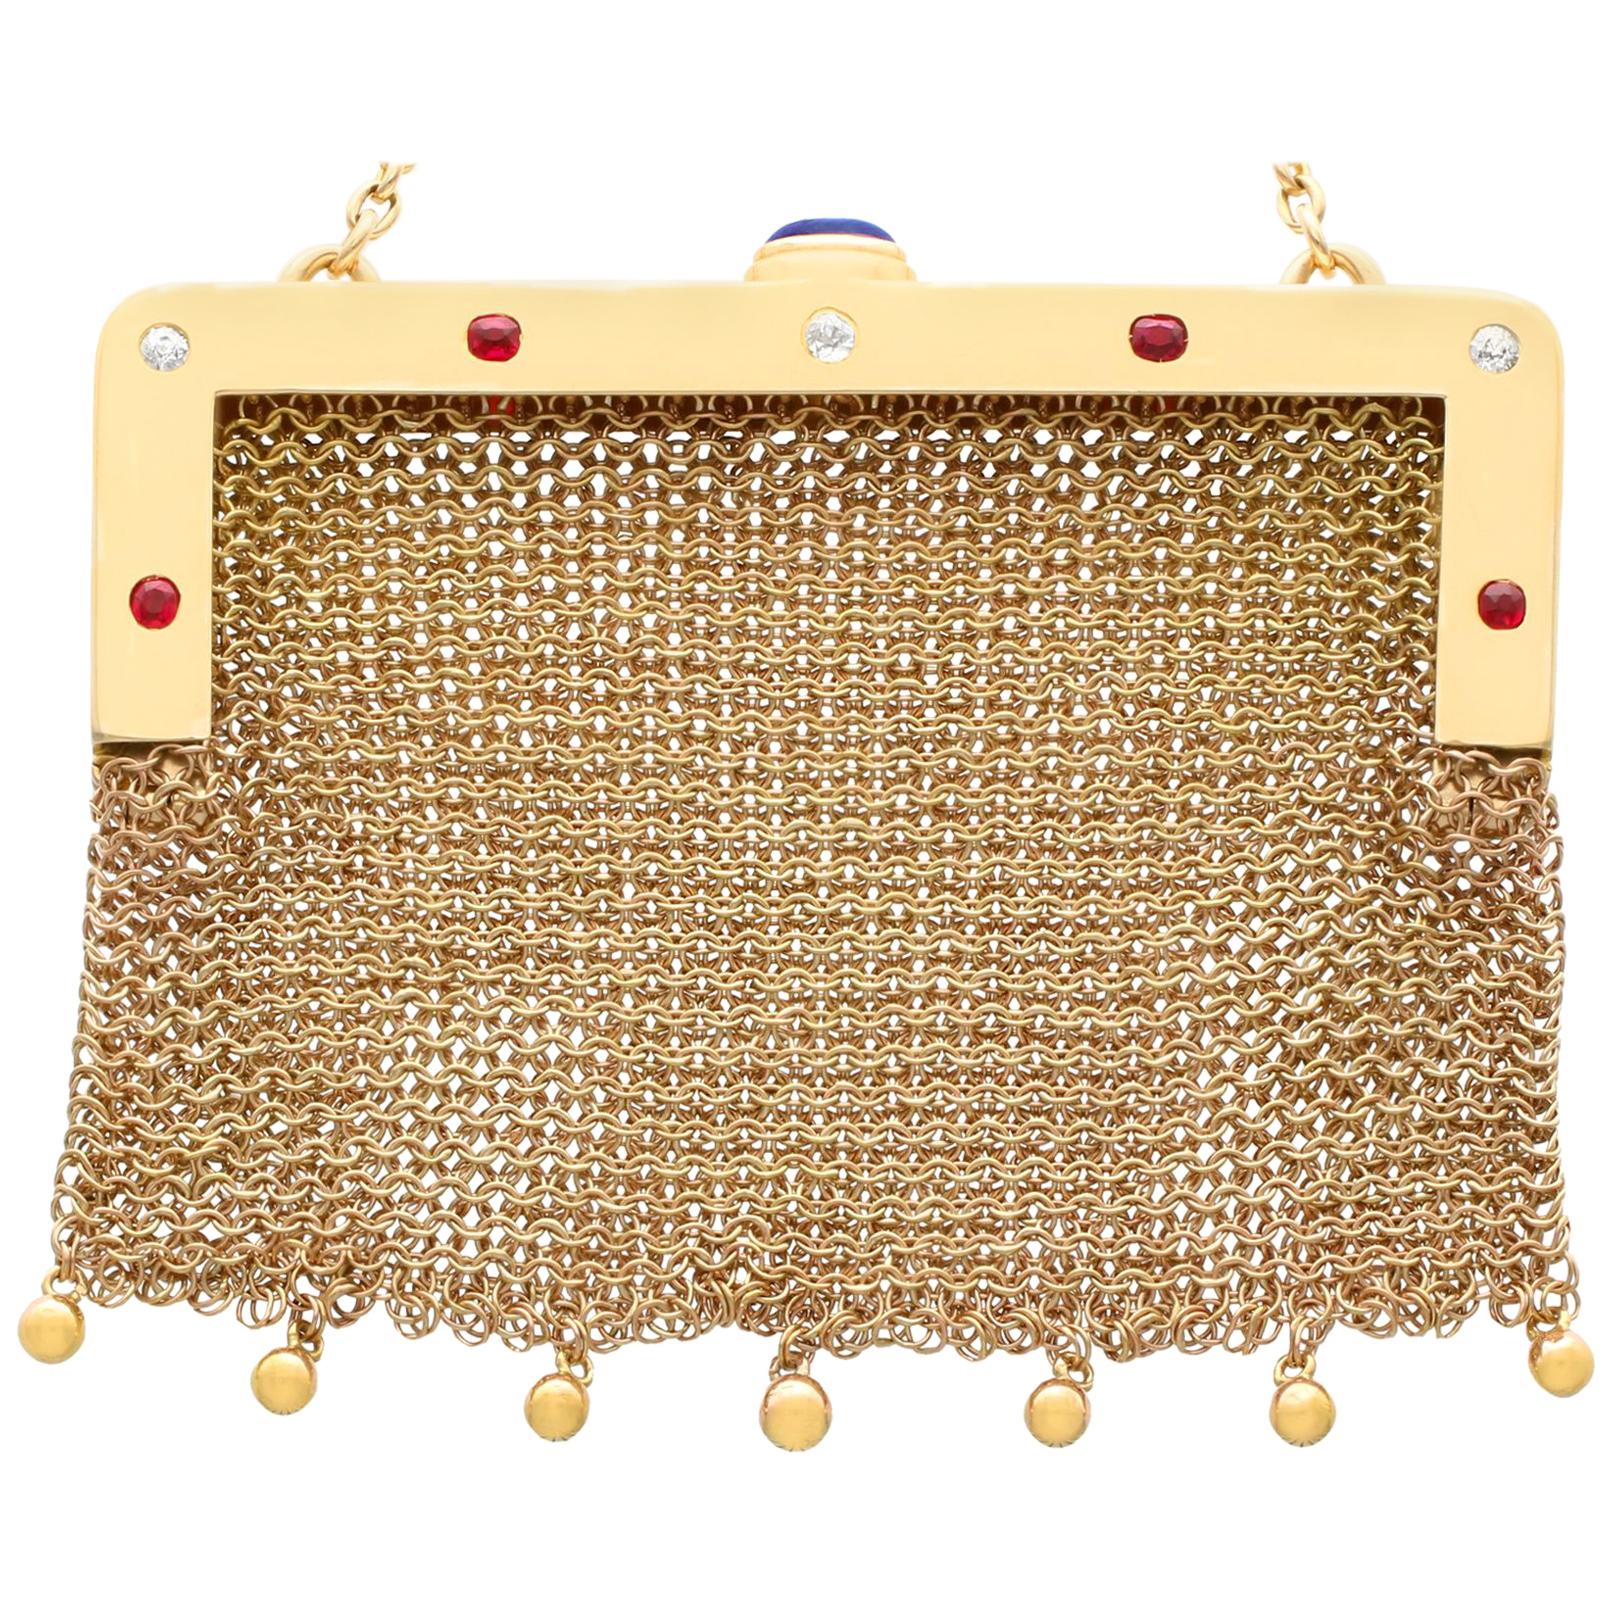 1910 Antique Sapphire, Ruby, and Diamond Yellow Gold Mesh Purse